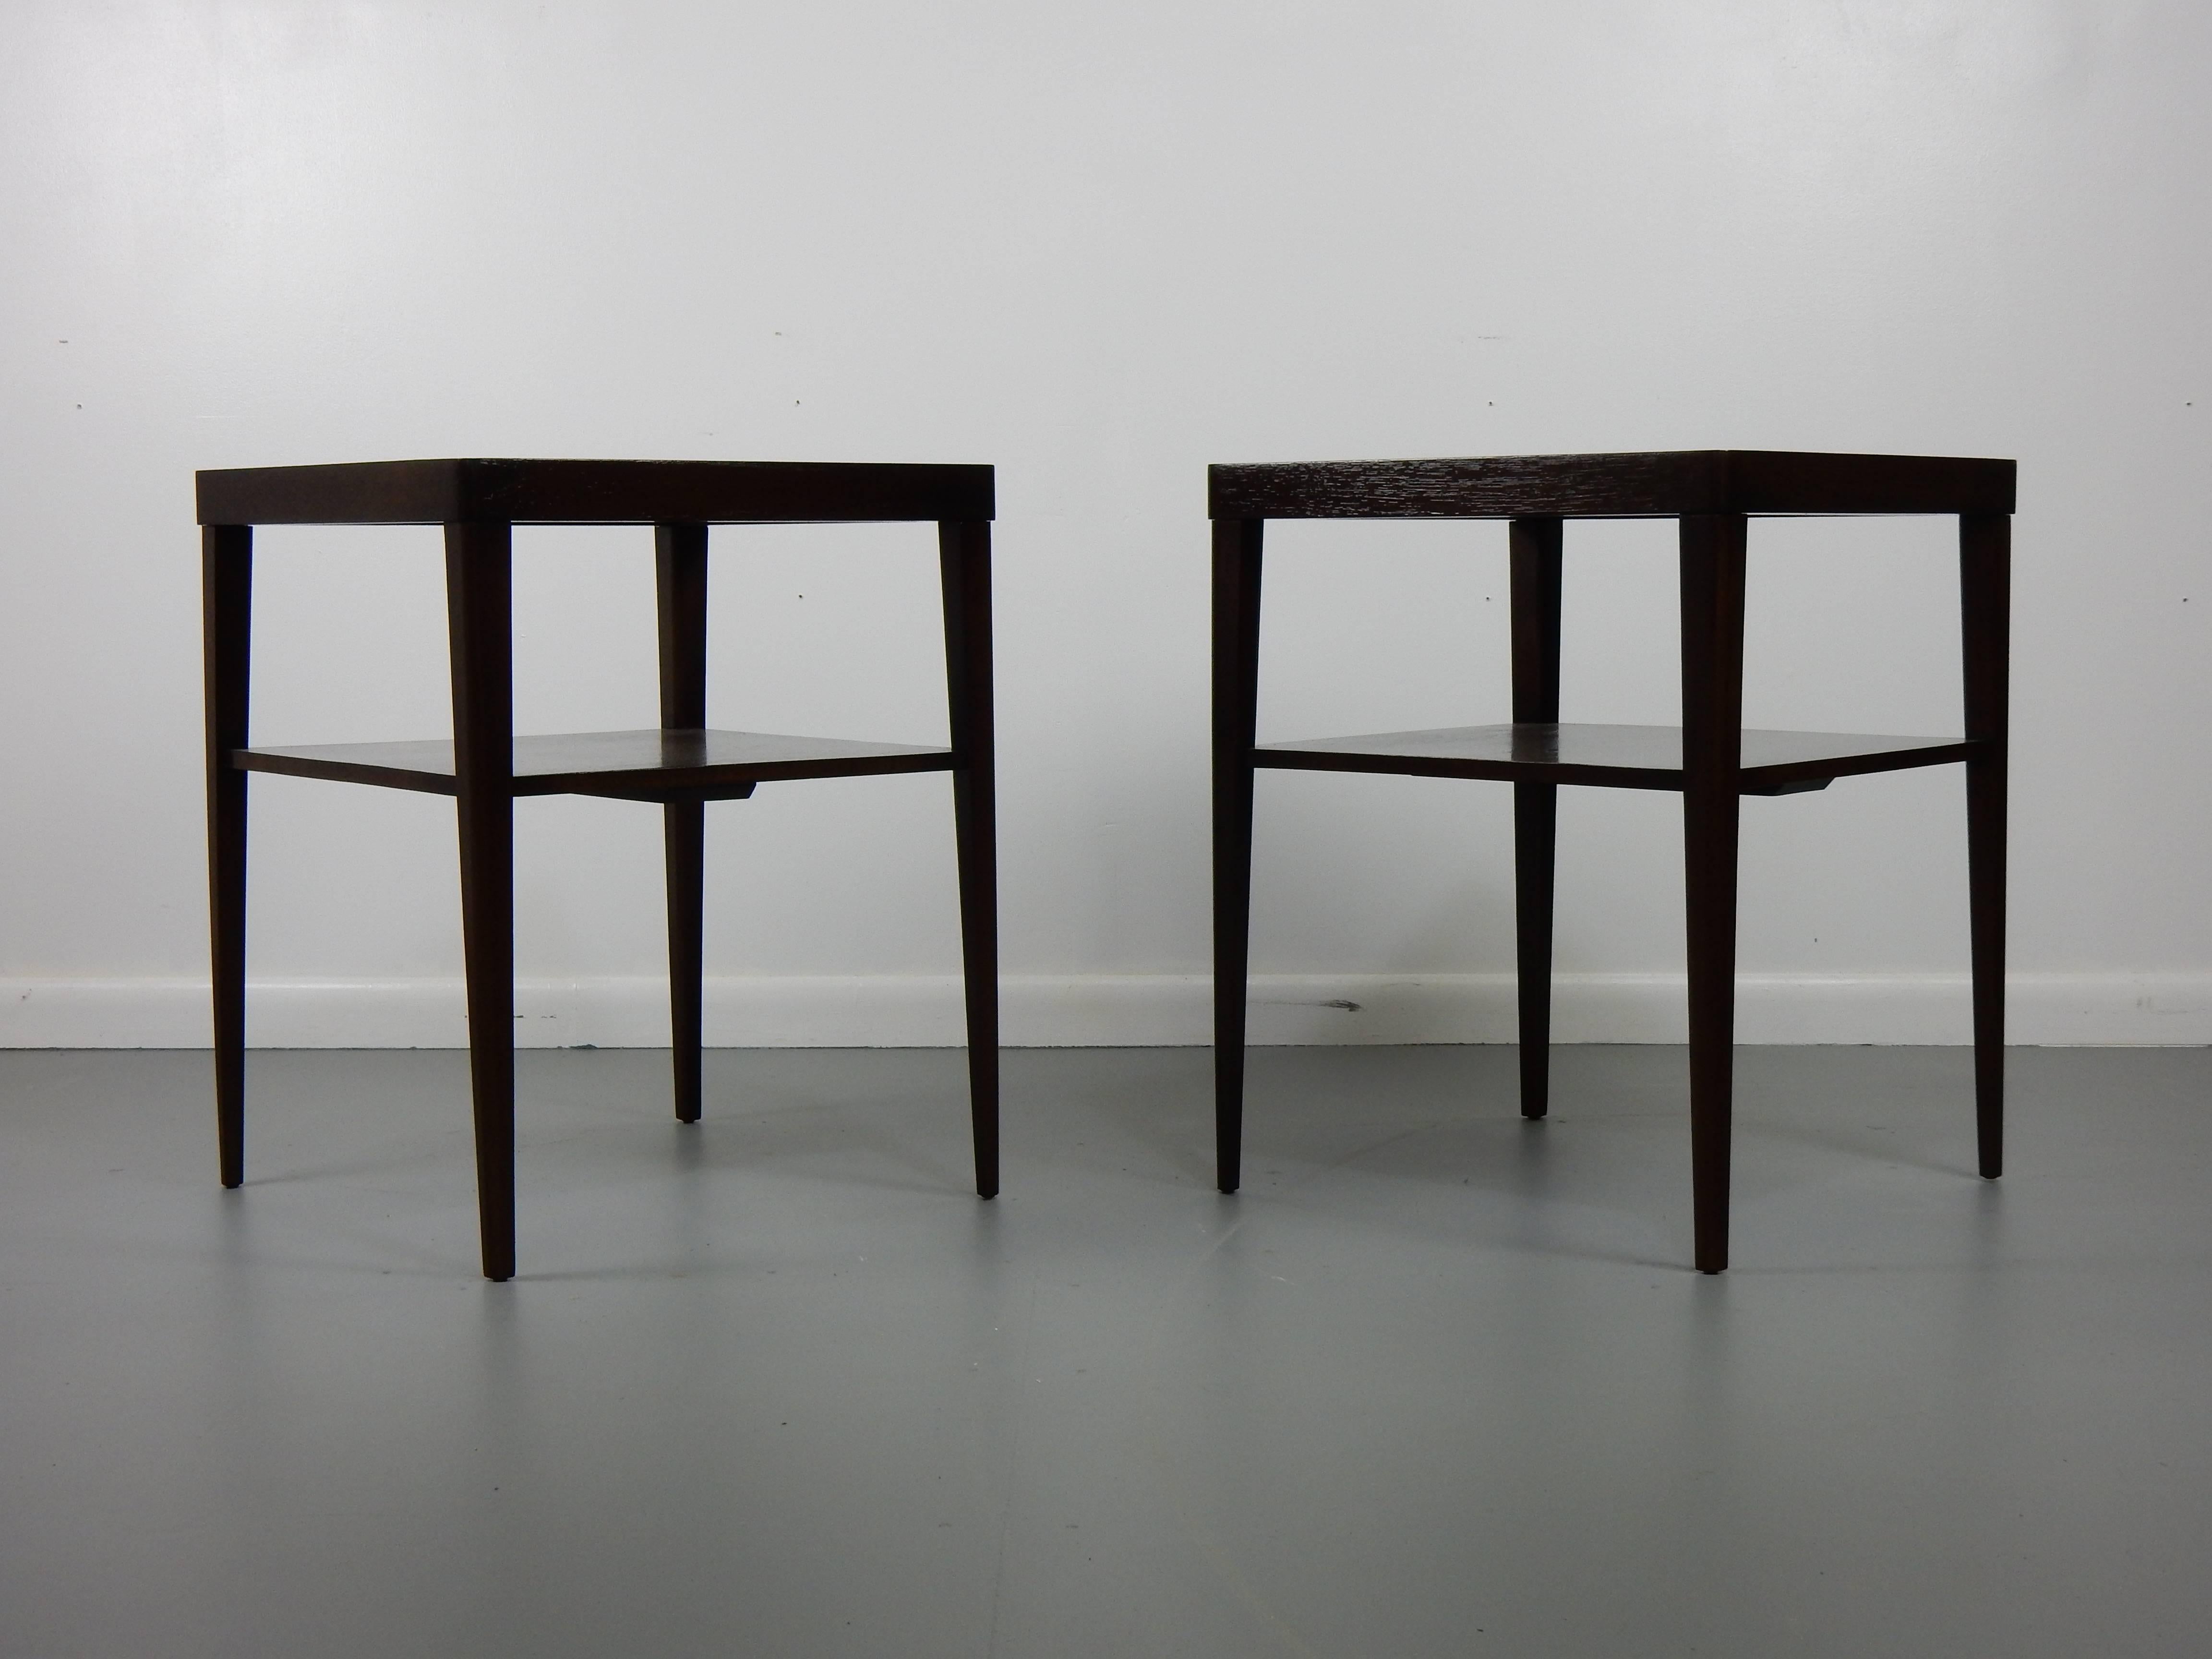 Uncommon side tables in the style of T.H. Robsjohn-Gibbings, refinished in a dark walnut stain. These tables would be useful in many settings as the size makes them so versatile.

Free delivery to NYC.